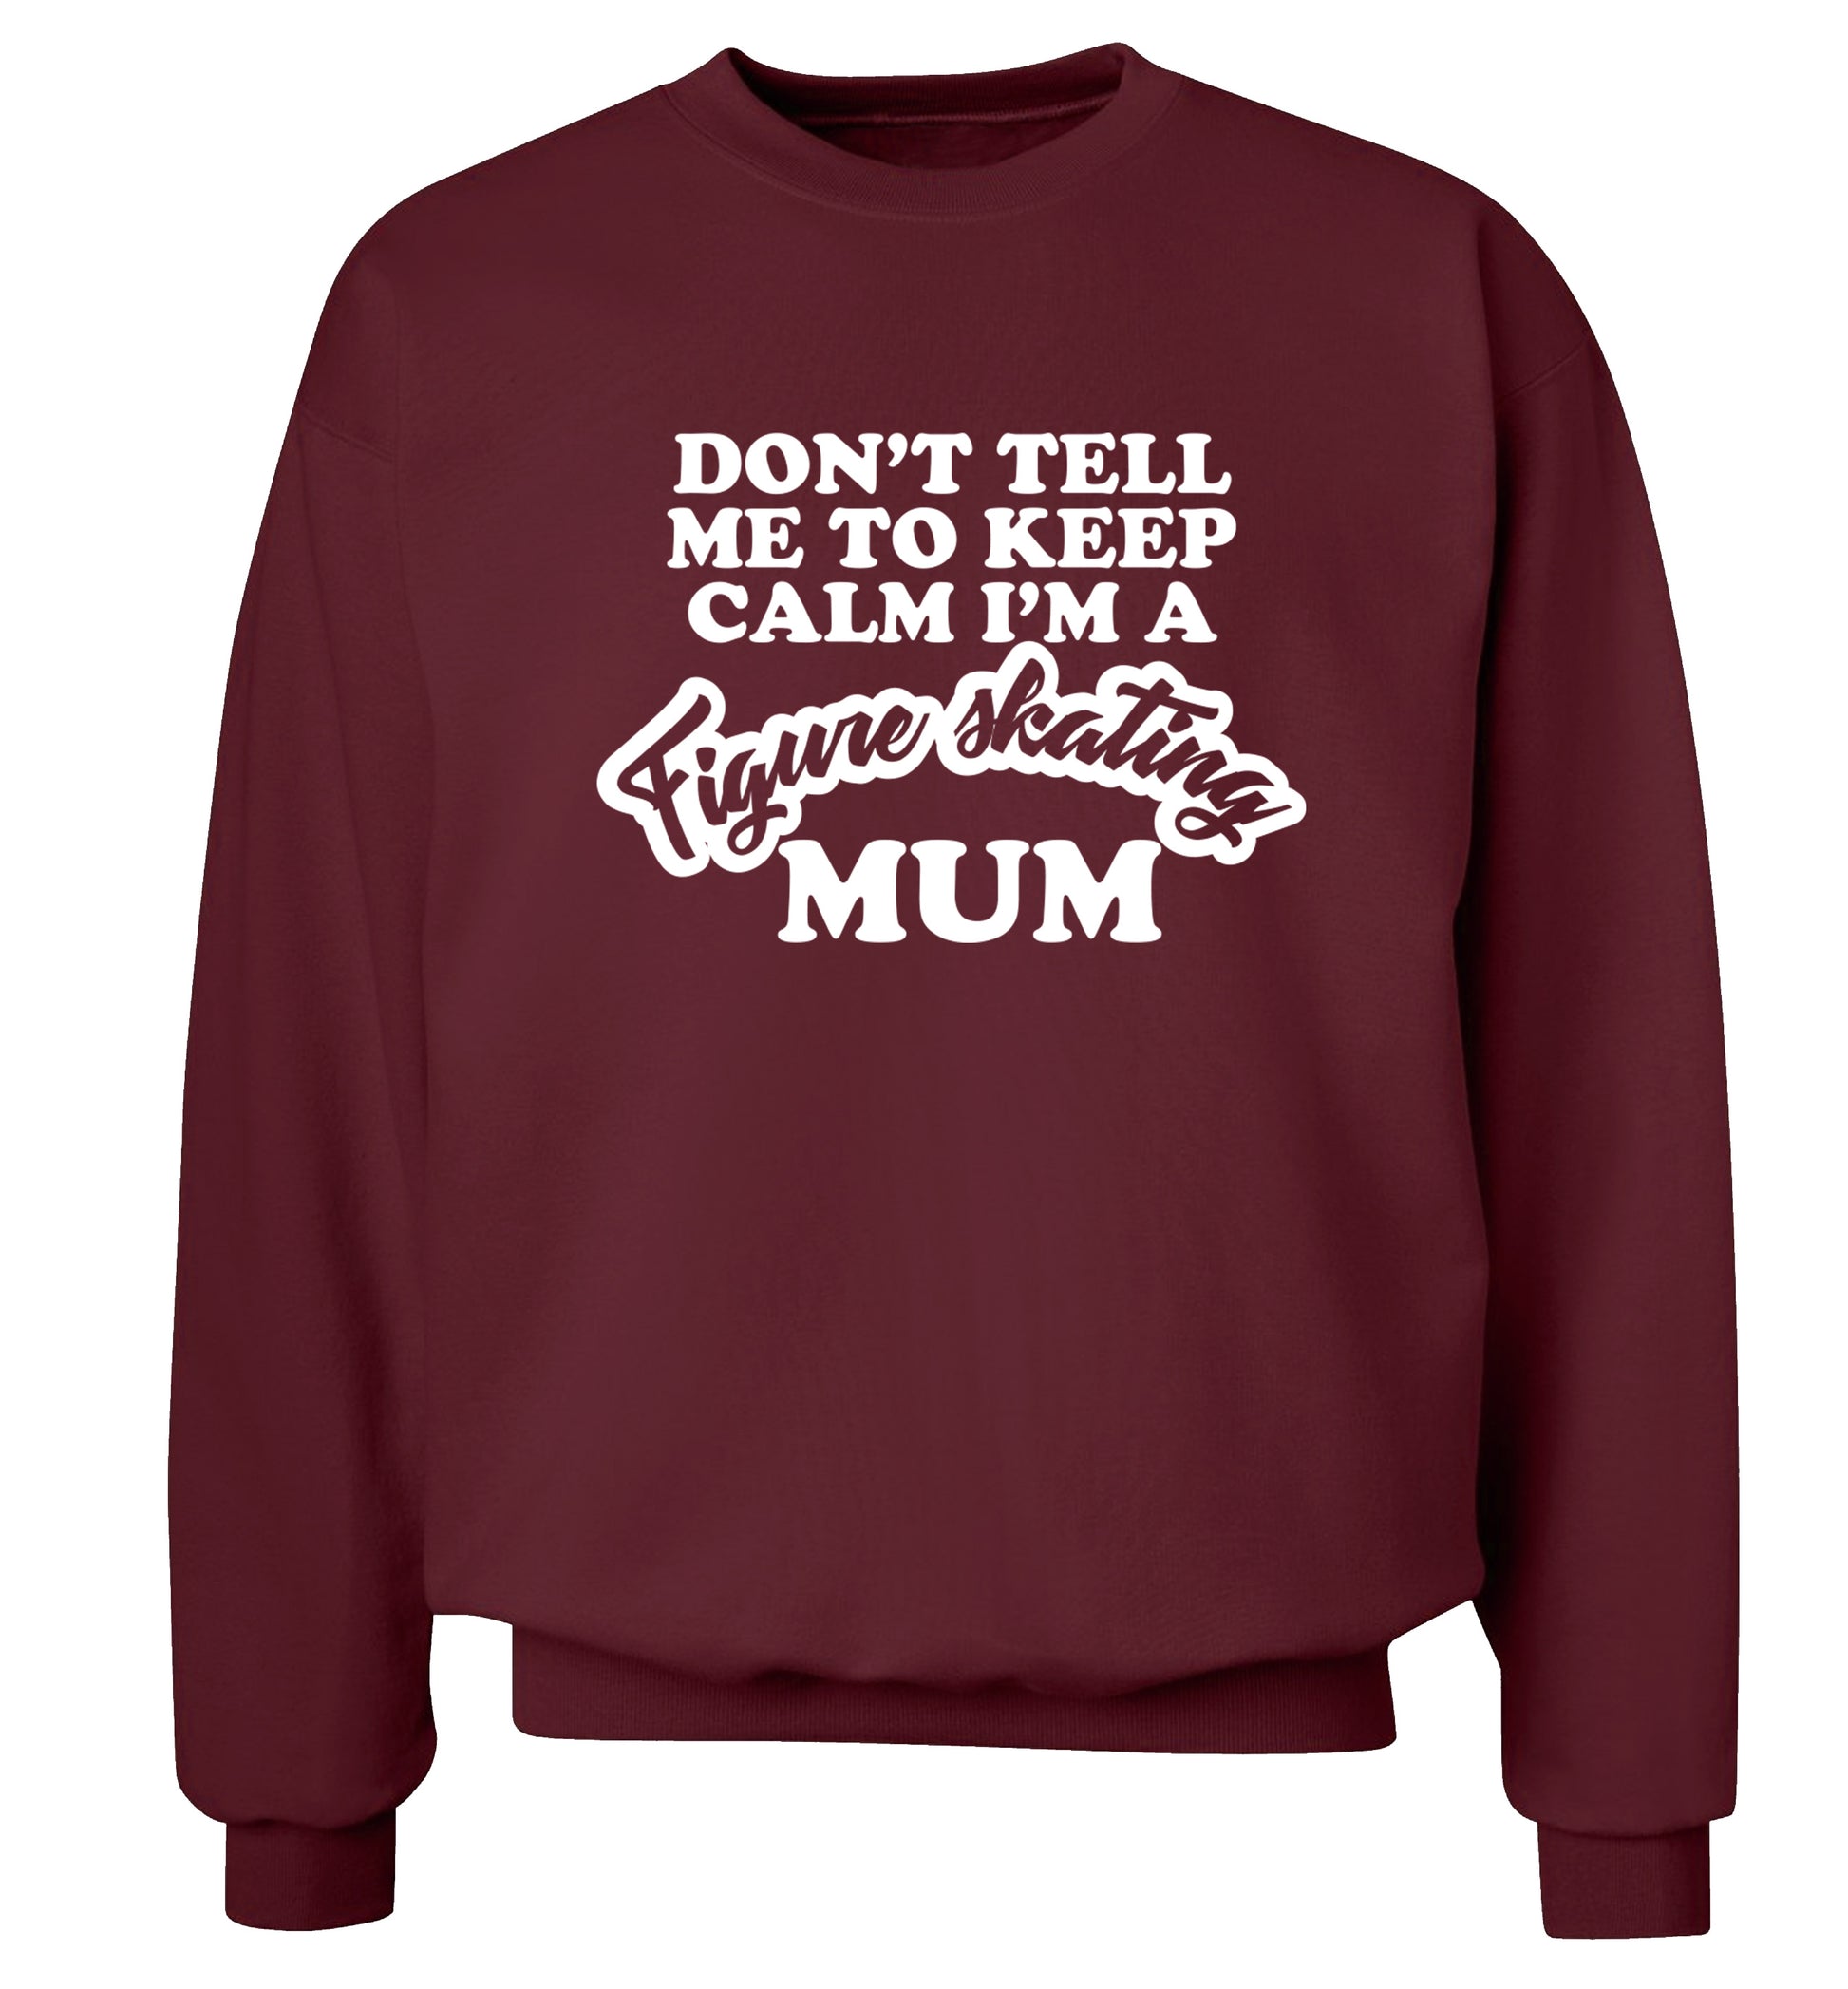 Don't tell me to keep calm I'm a figure skating mum Adult's unisexmaroon Sweater 2XL